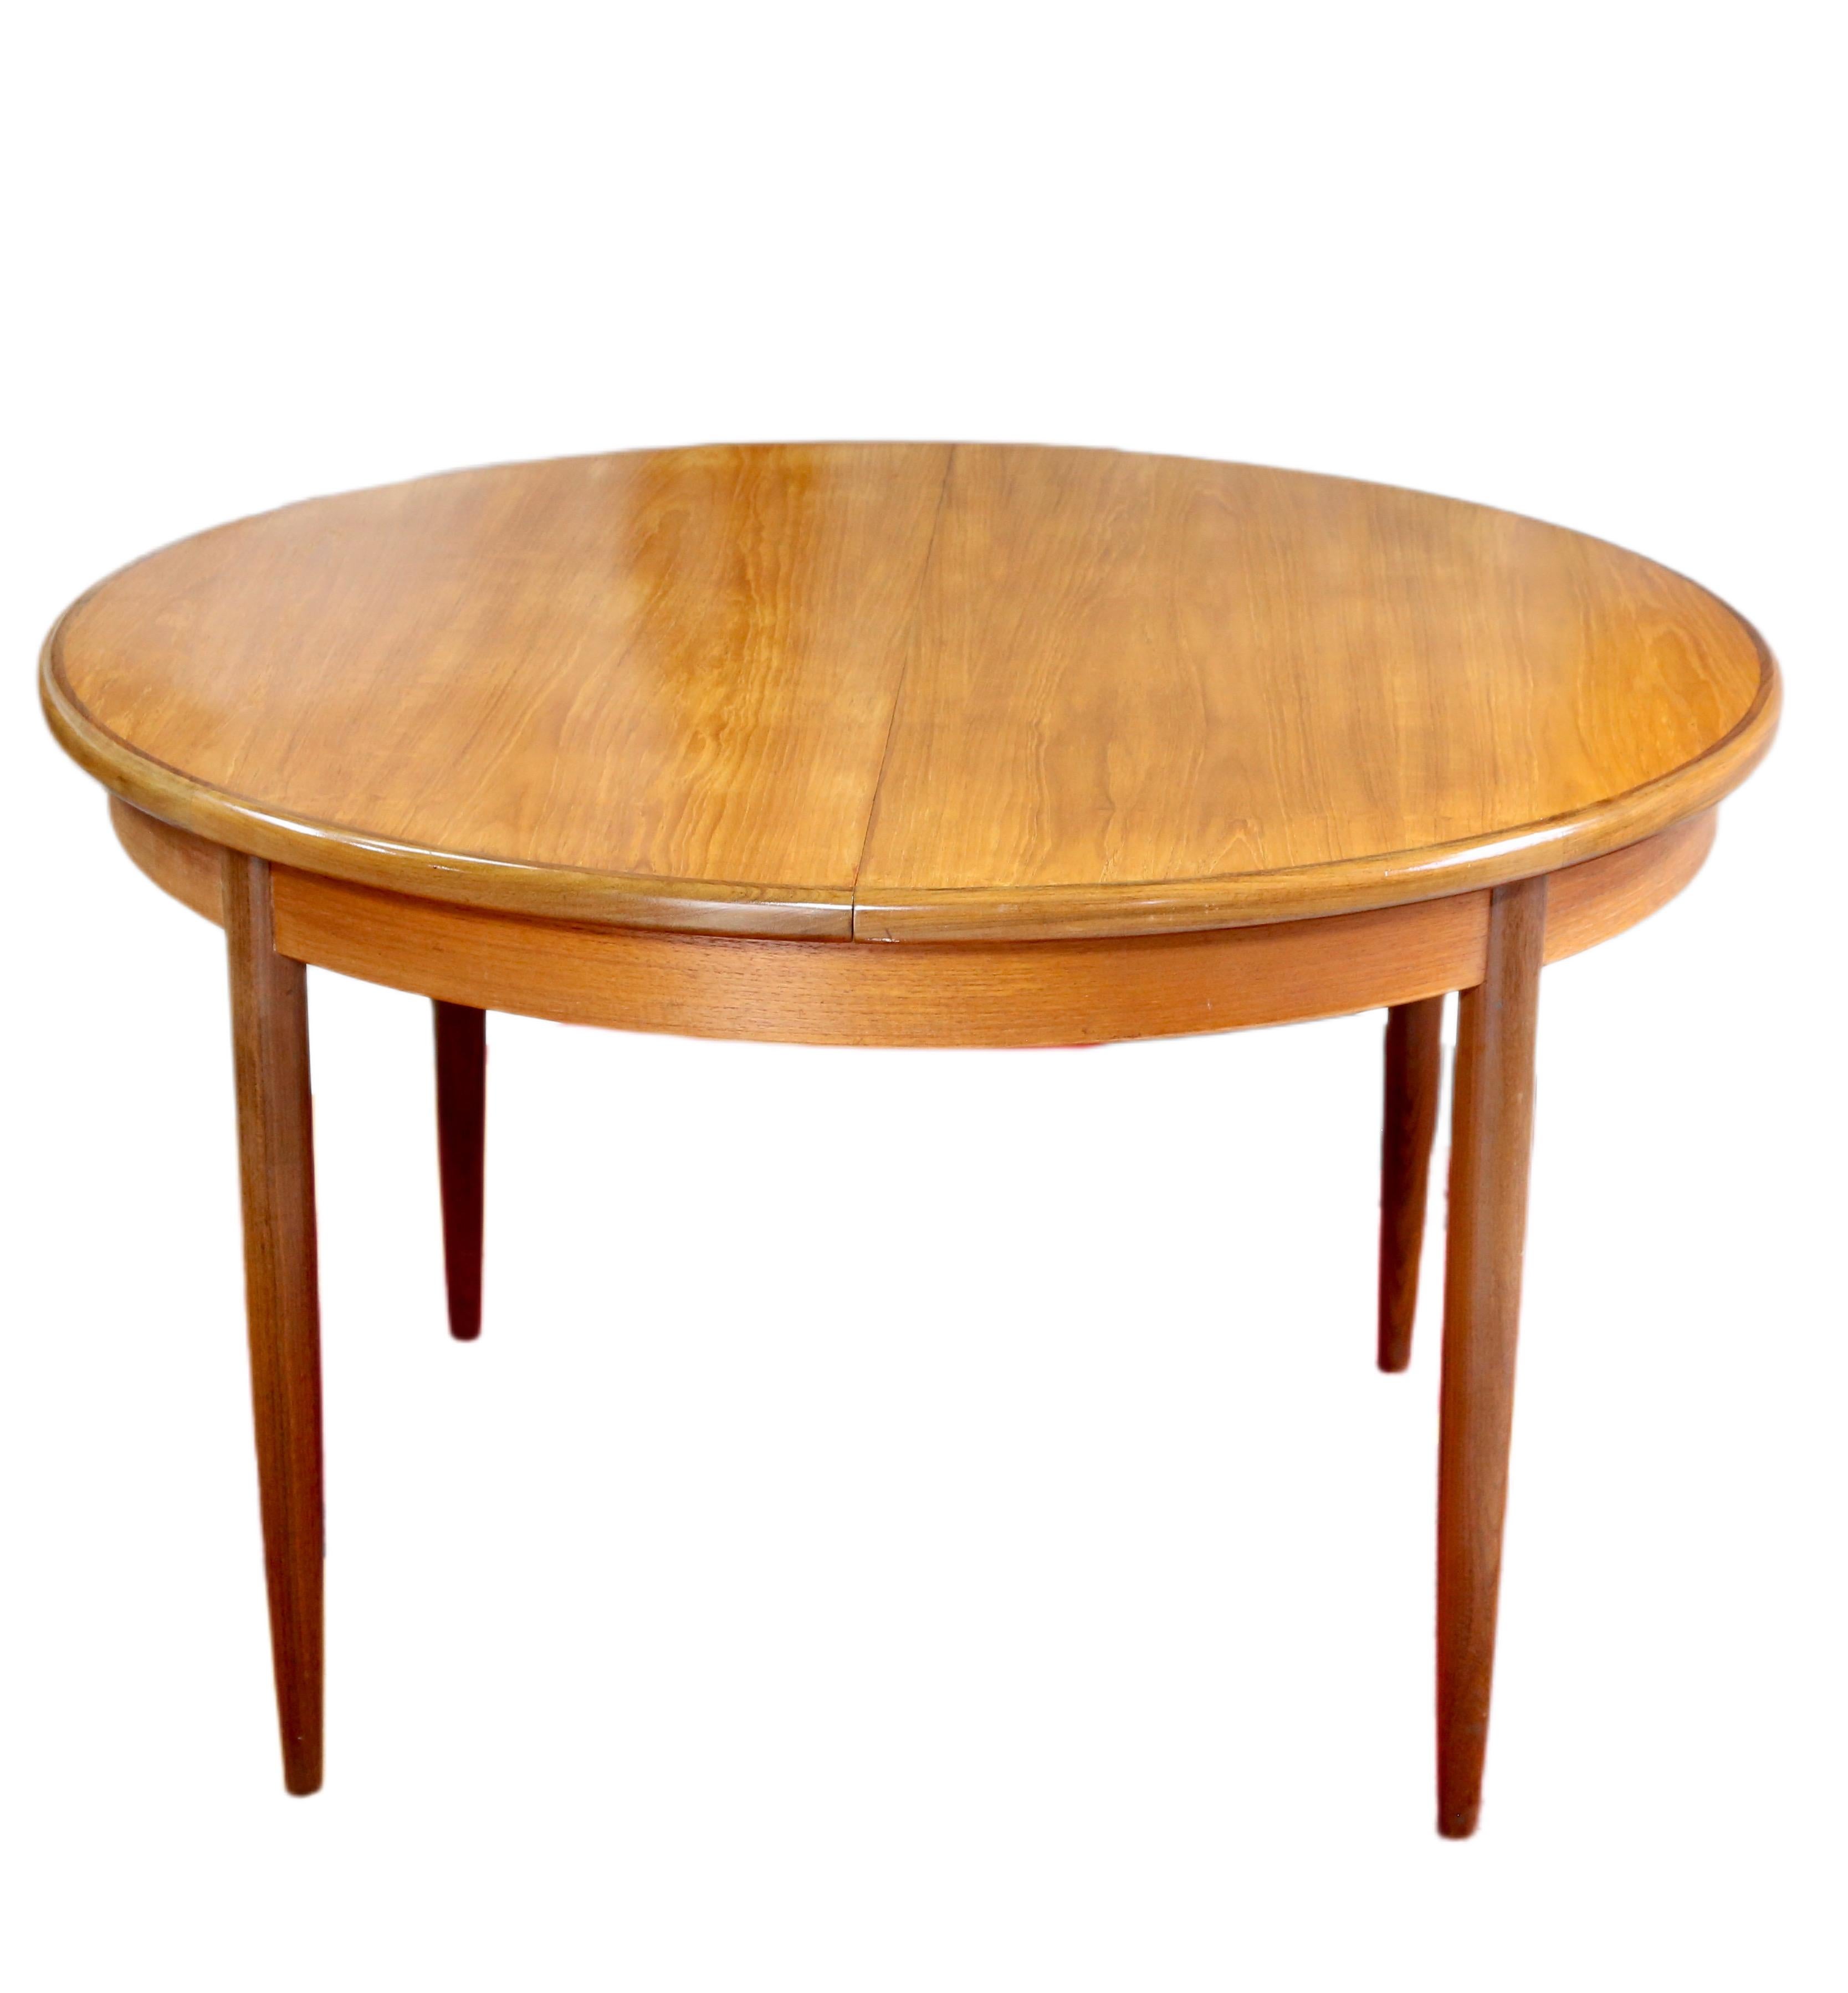 20th Century Mid Century Modern G Plan Fresco Round Extending Teak Dining Table By VB Wilkins For Sale